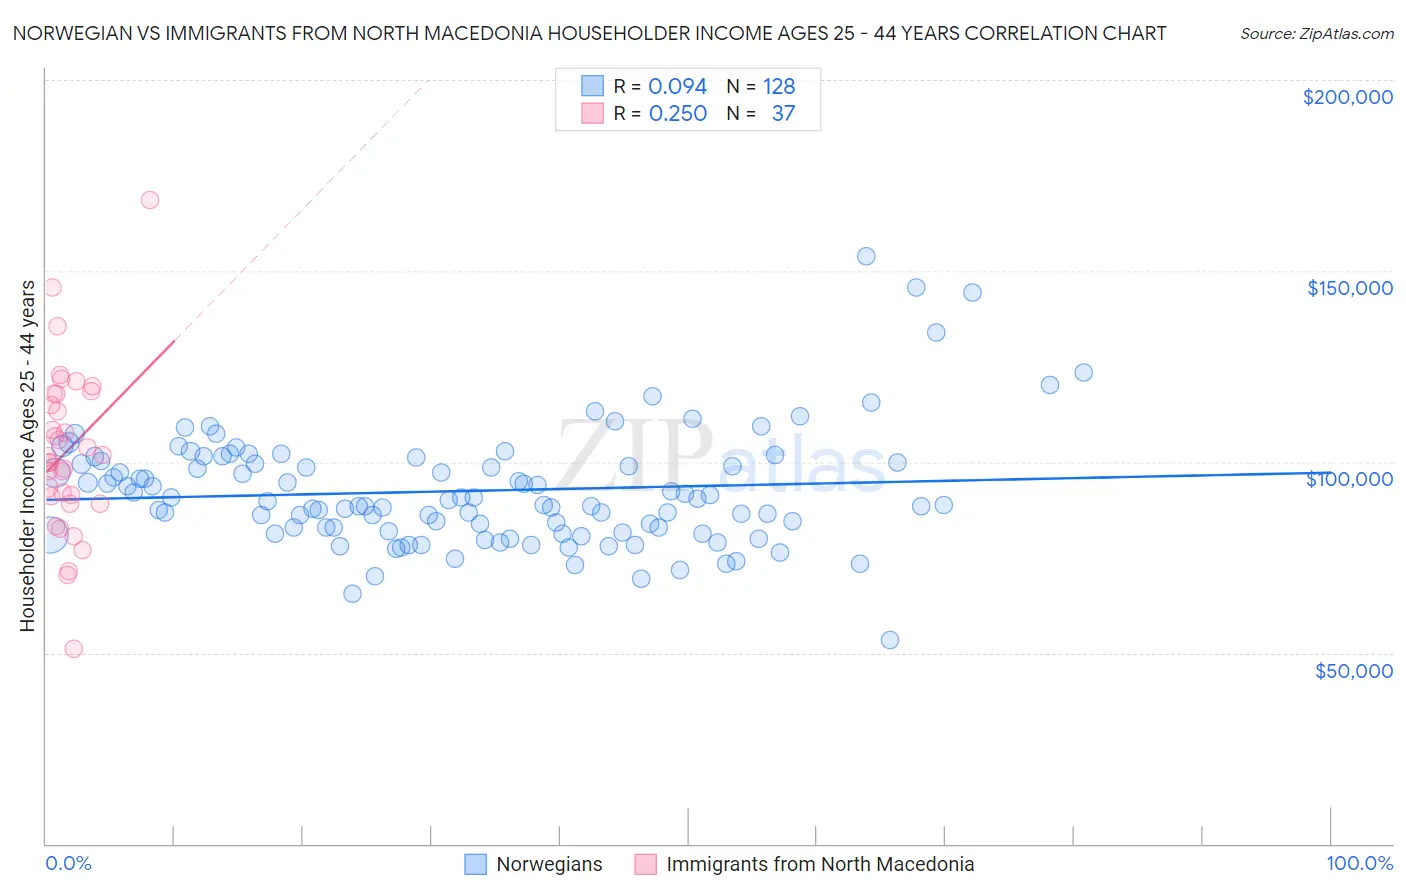 Norwegian vs Immigrants from North Macedonia Householder Income Ages 25 - 44 years